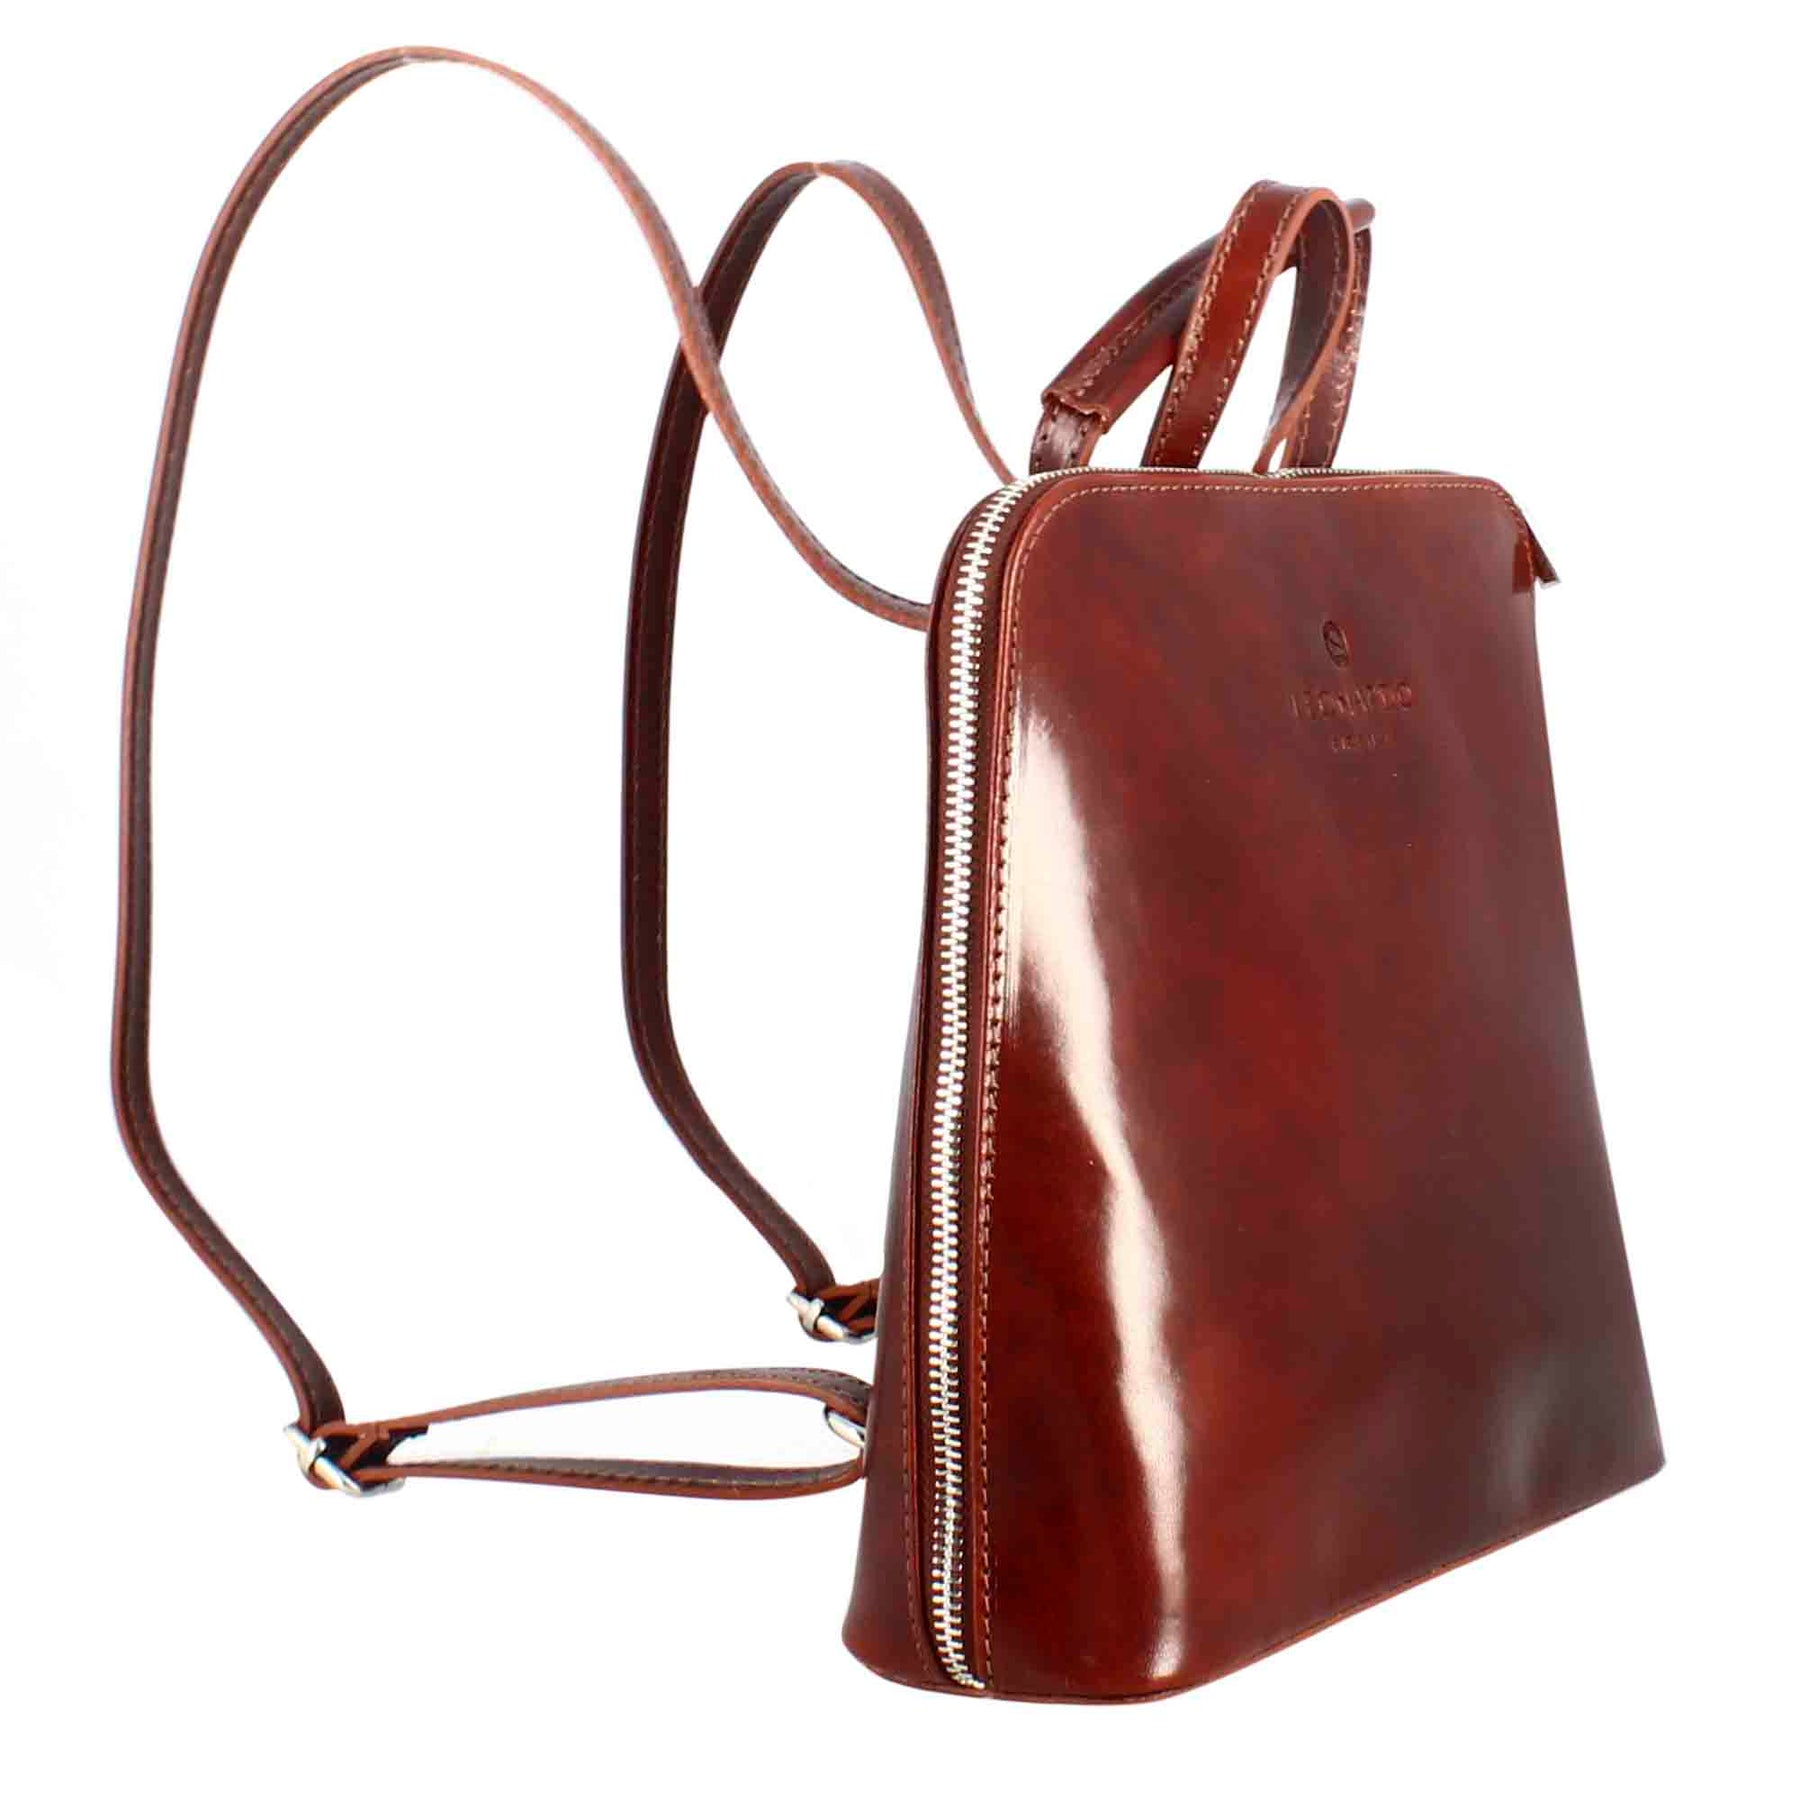 Women's Ginevra backpack in smooth brown leather with zip